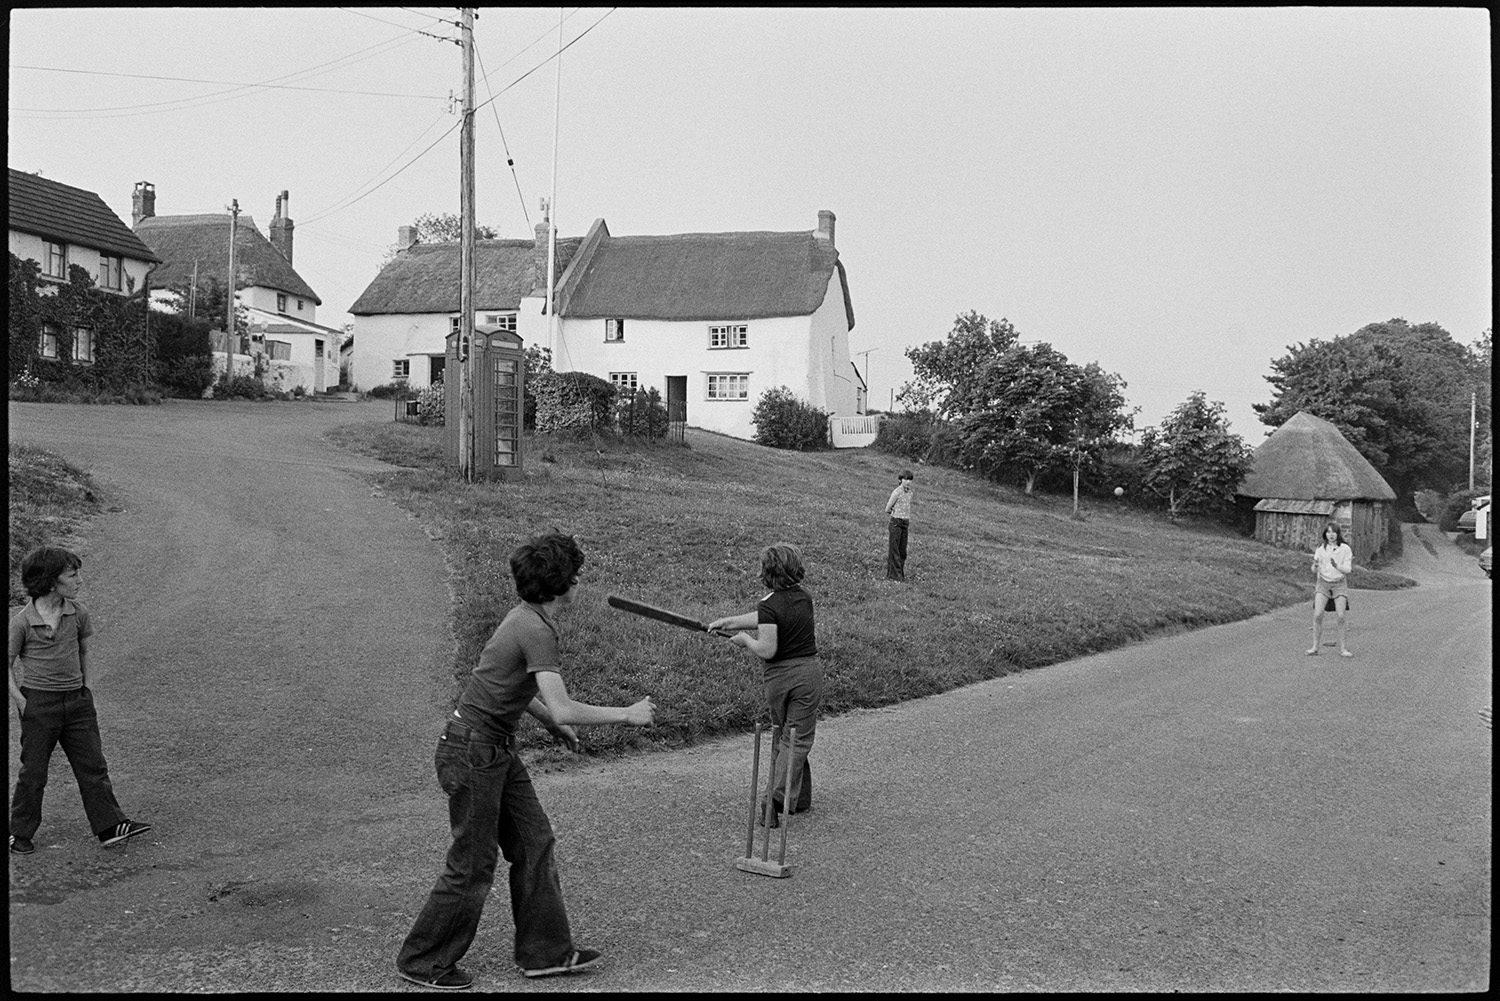 Children playing cricket in street. 
[Boys playing cricket in a street in Iddesleigh. Thatched cottages and a telephone box can be seen by the village green.]